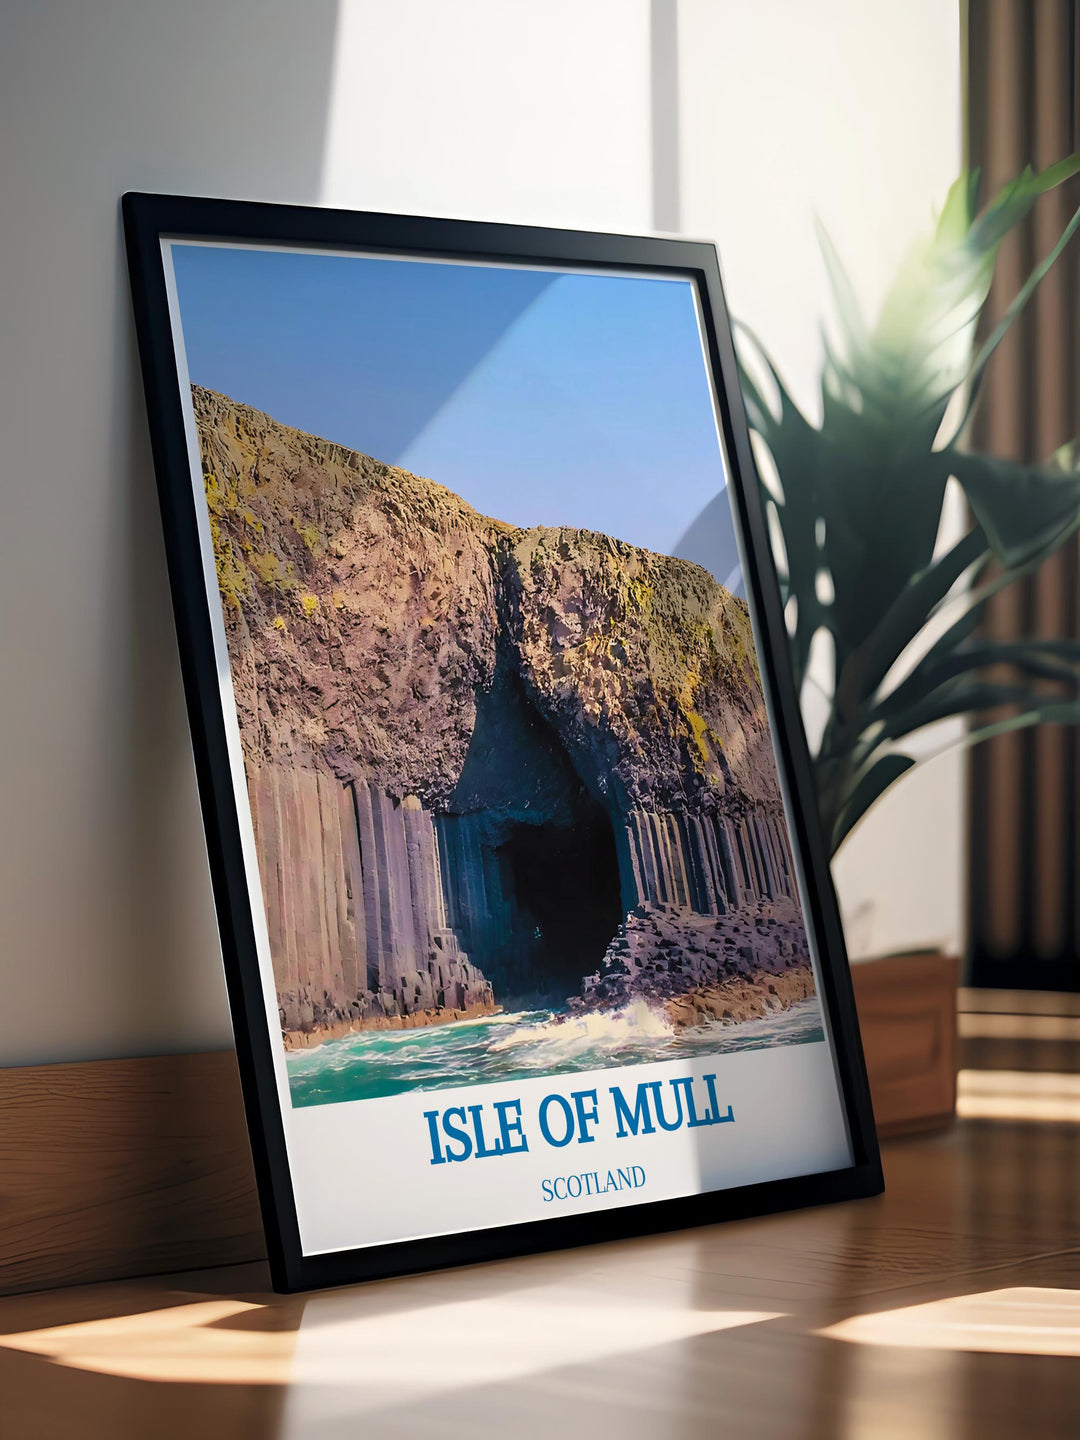 Scottish landscape wall art featuring panoramic views of the Isle of Mull perfect for adding depth and perspective to any home decor